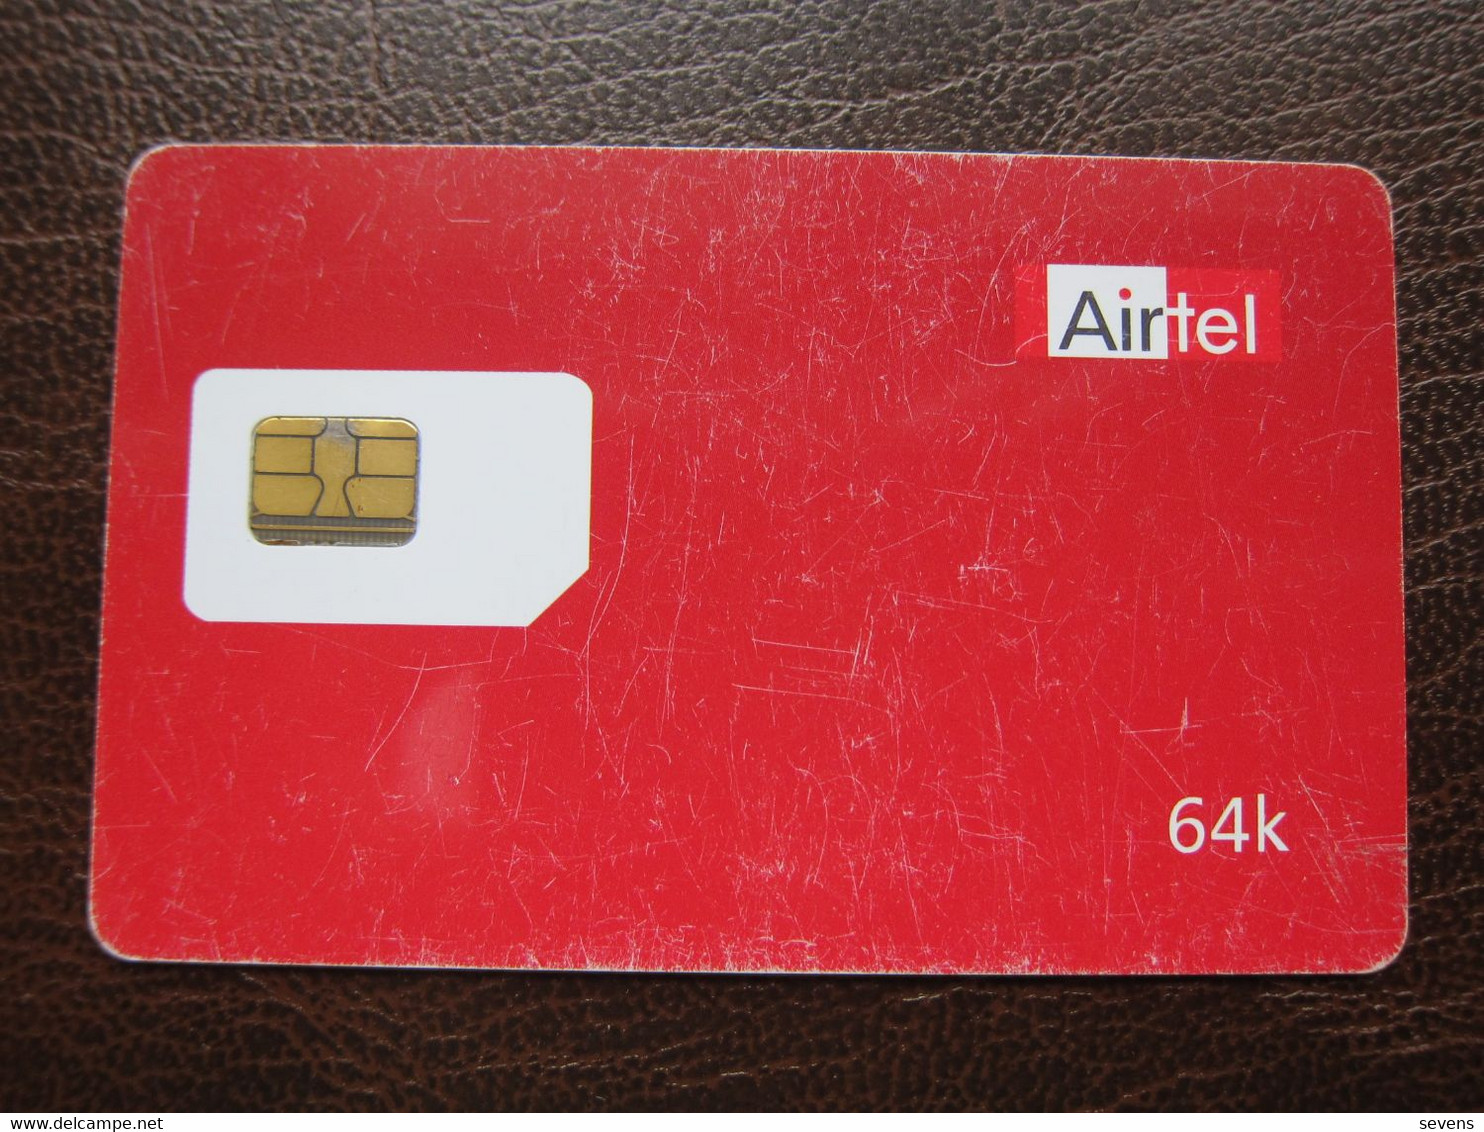 Airtel 64K GSM SIM Card, Sample Card Without Account Number, With Scratchs, Chip Moudle Wrong Cut - Indien